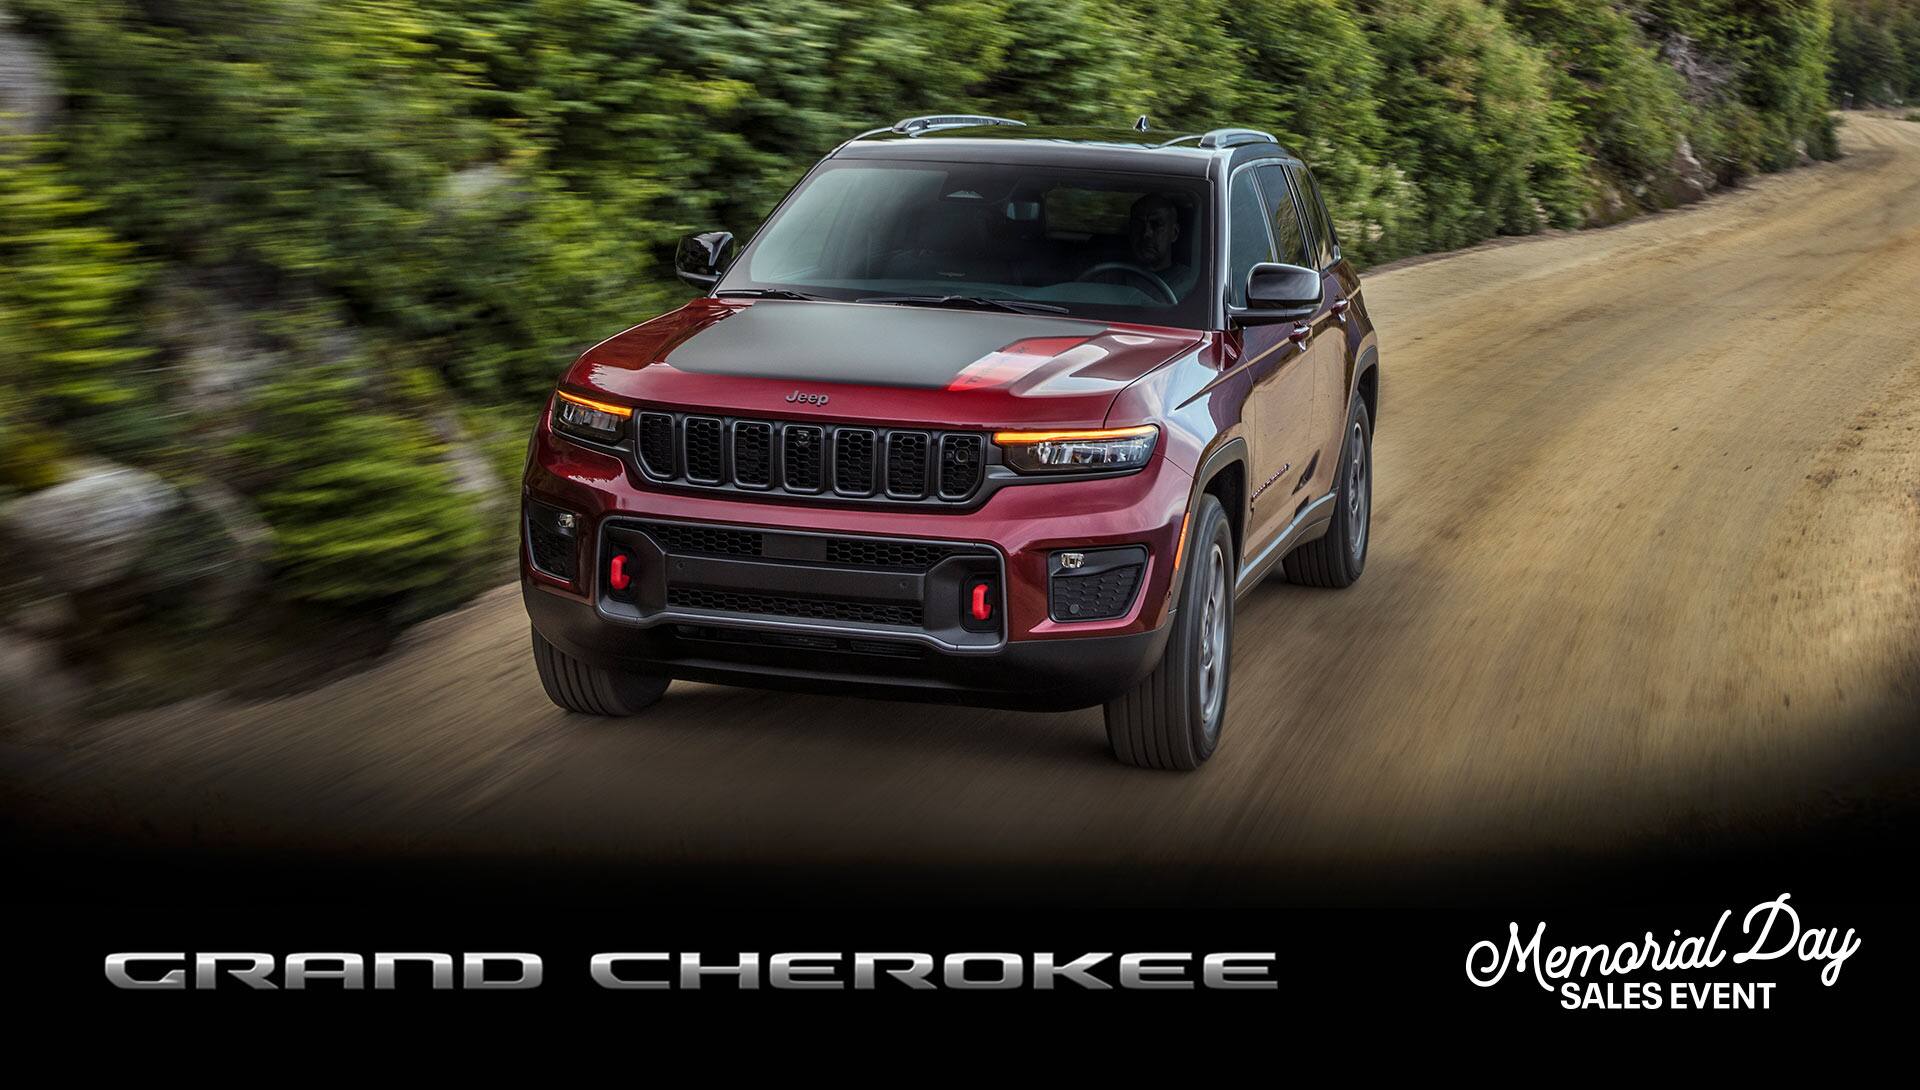 The 2022 Jeep Grand Cherokee Trailhawk being driven on a dirt road, with the background blurred to indicate its speed.